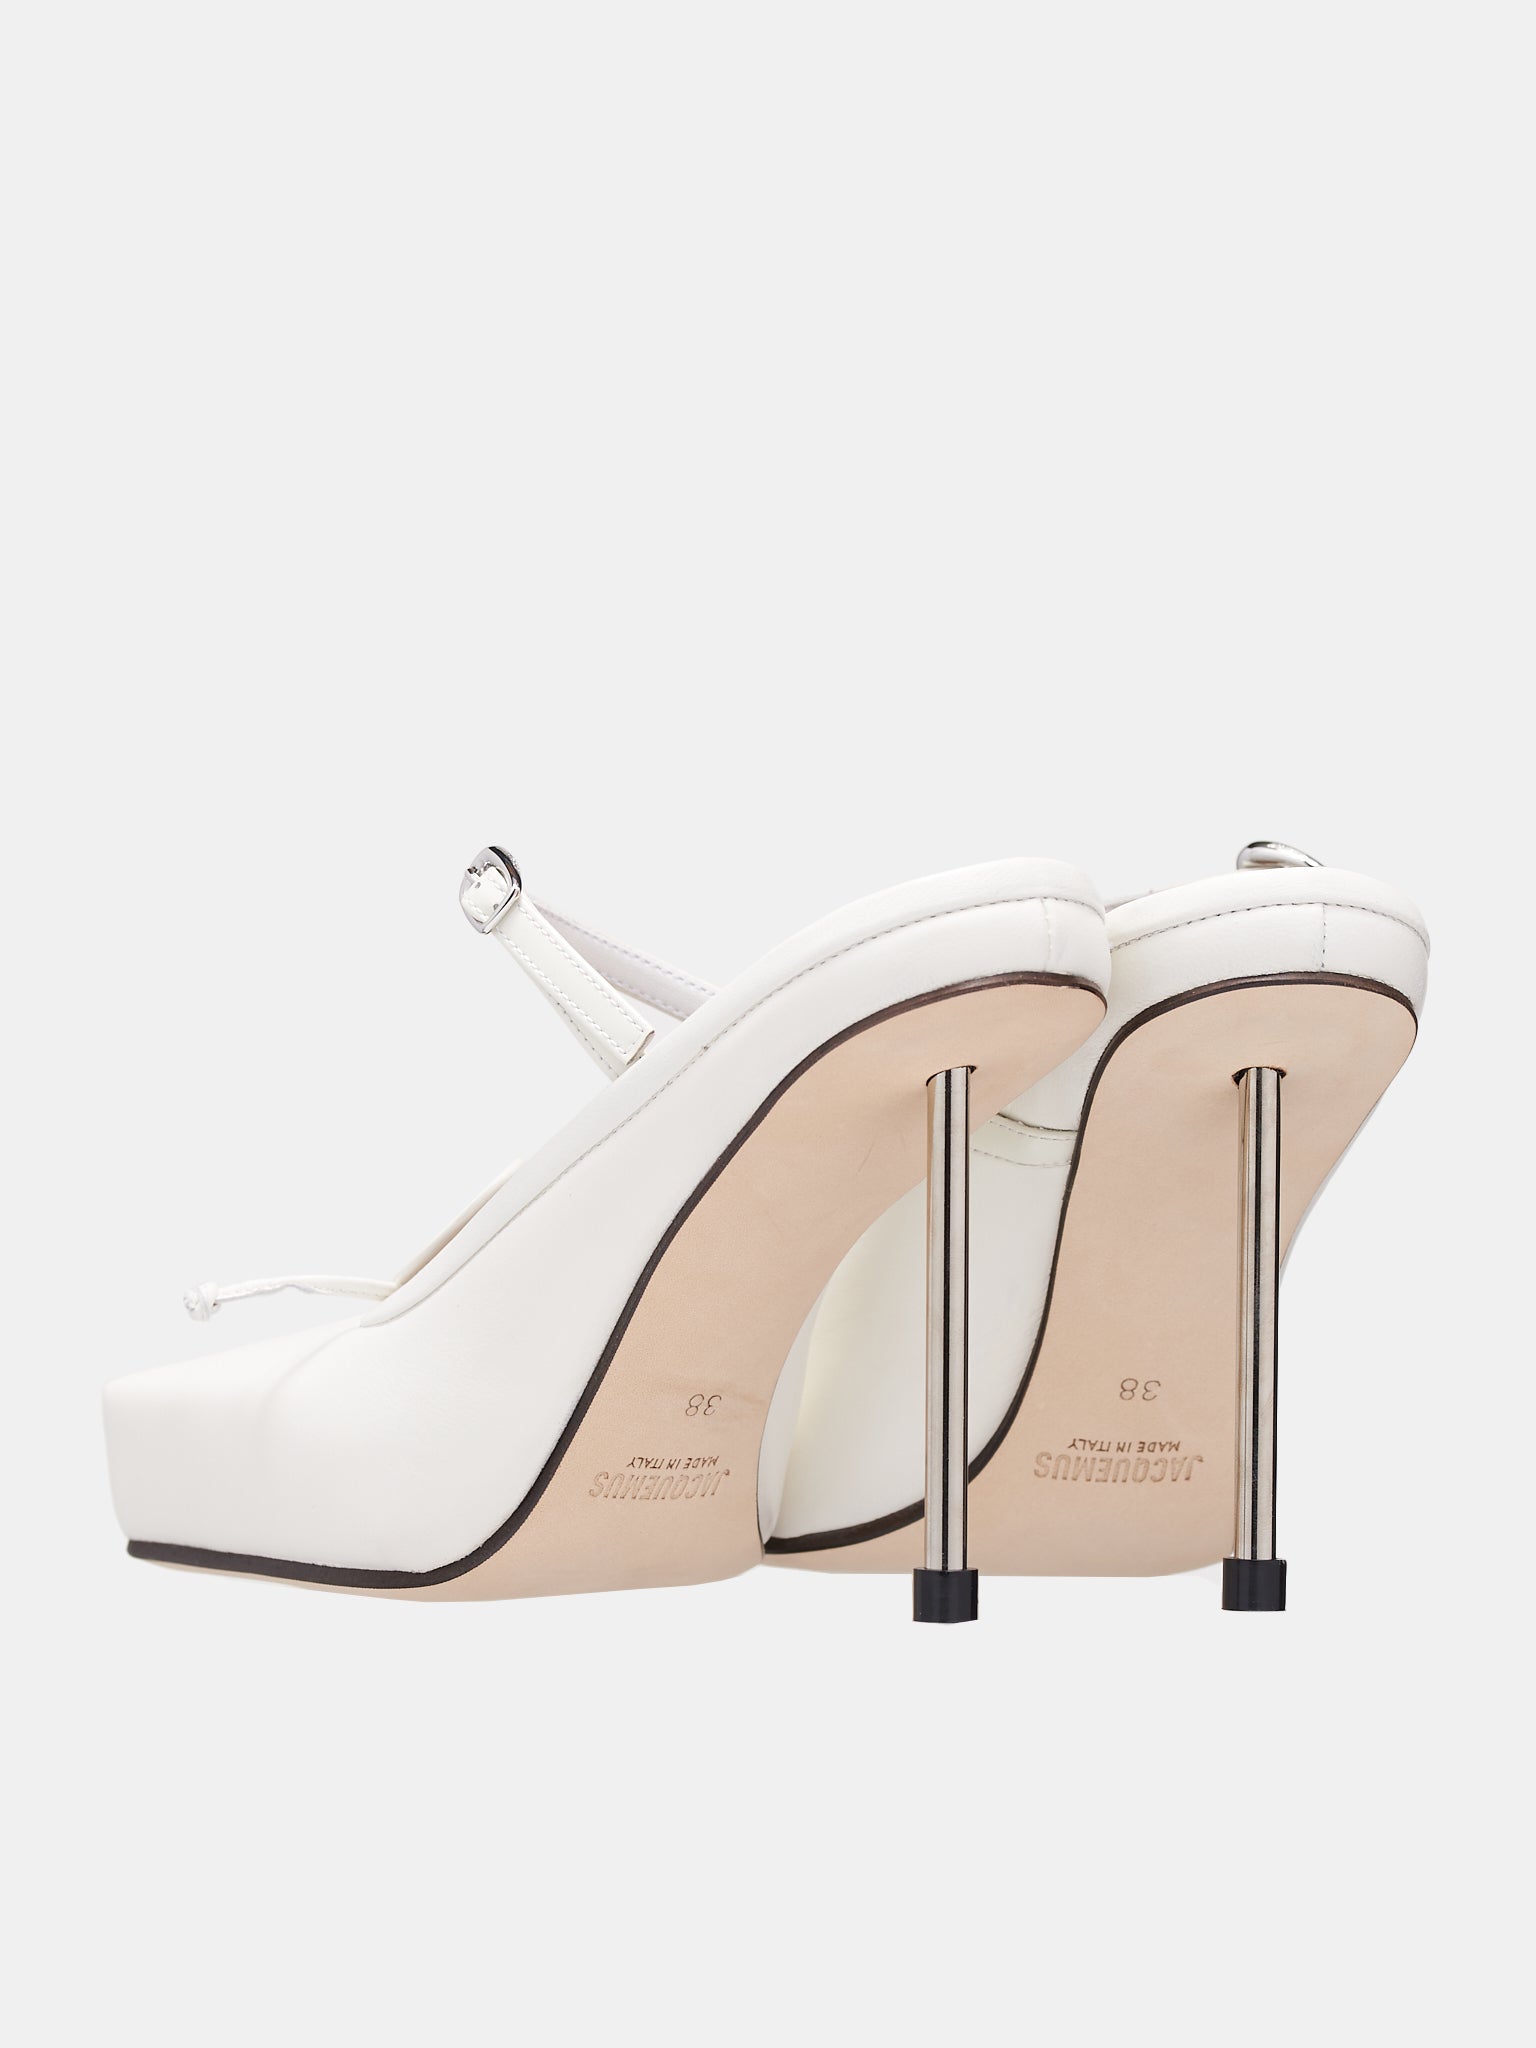 Les chaussures Ballet (233F0120-3073-110-OFF-WHITE)